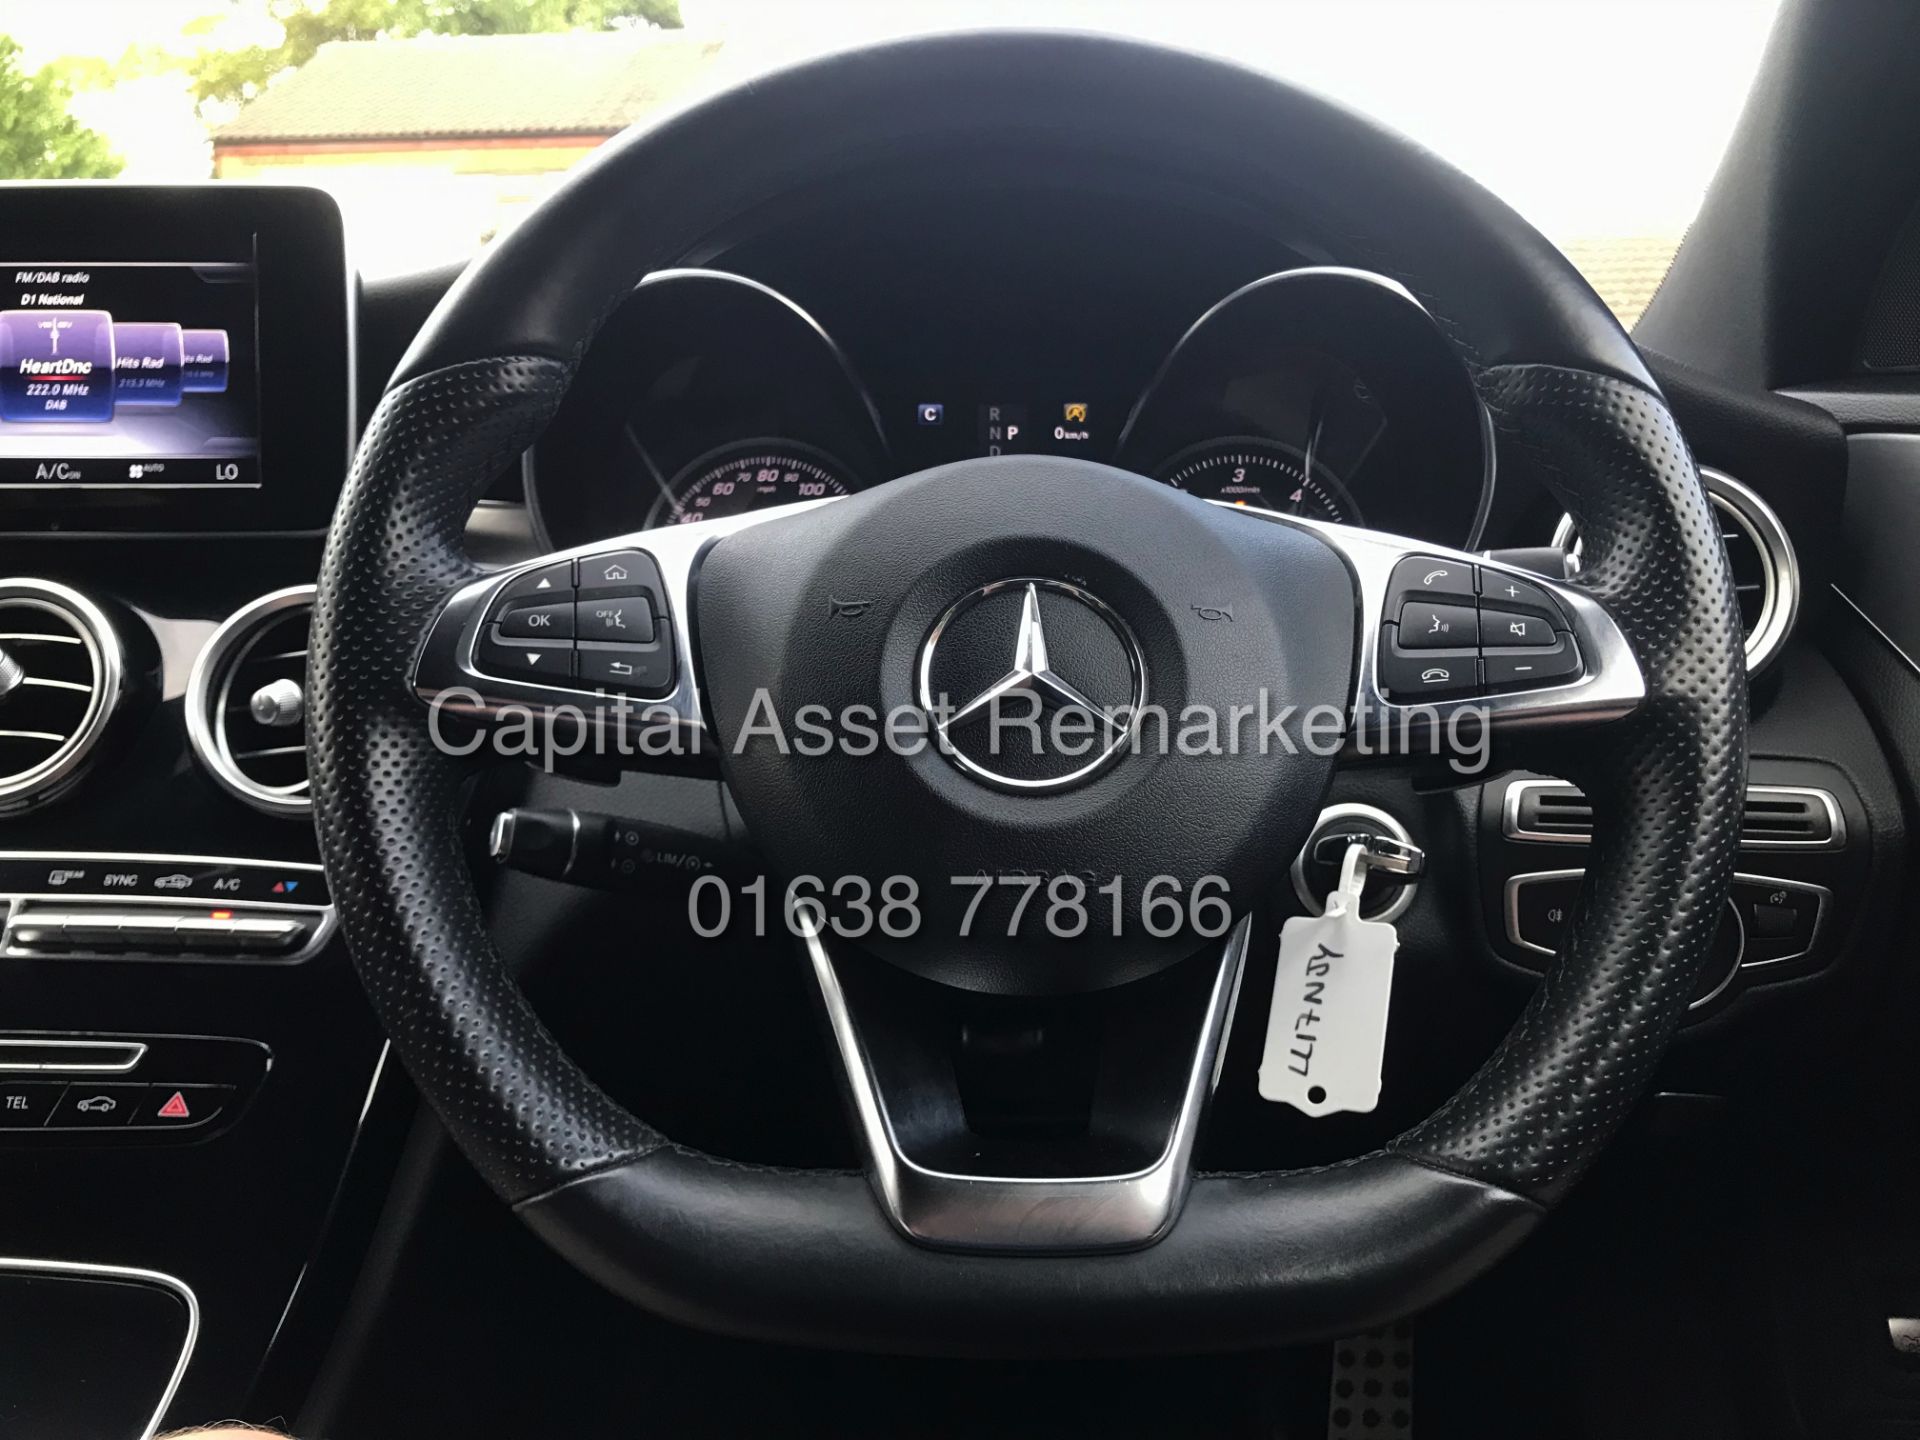 (ON SALE) MERCEDES-BENZ C220d *AMG EDITION* SALOON (2017) '9-G TRONIC AUTO - LEATHER - SAT NAV' - Image 18 of 20